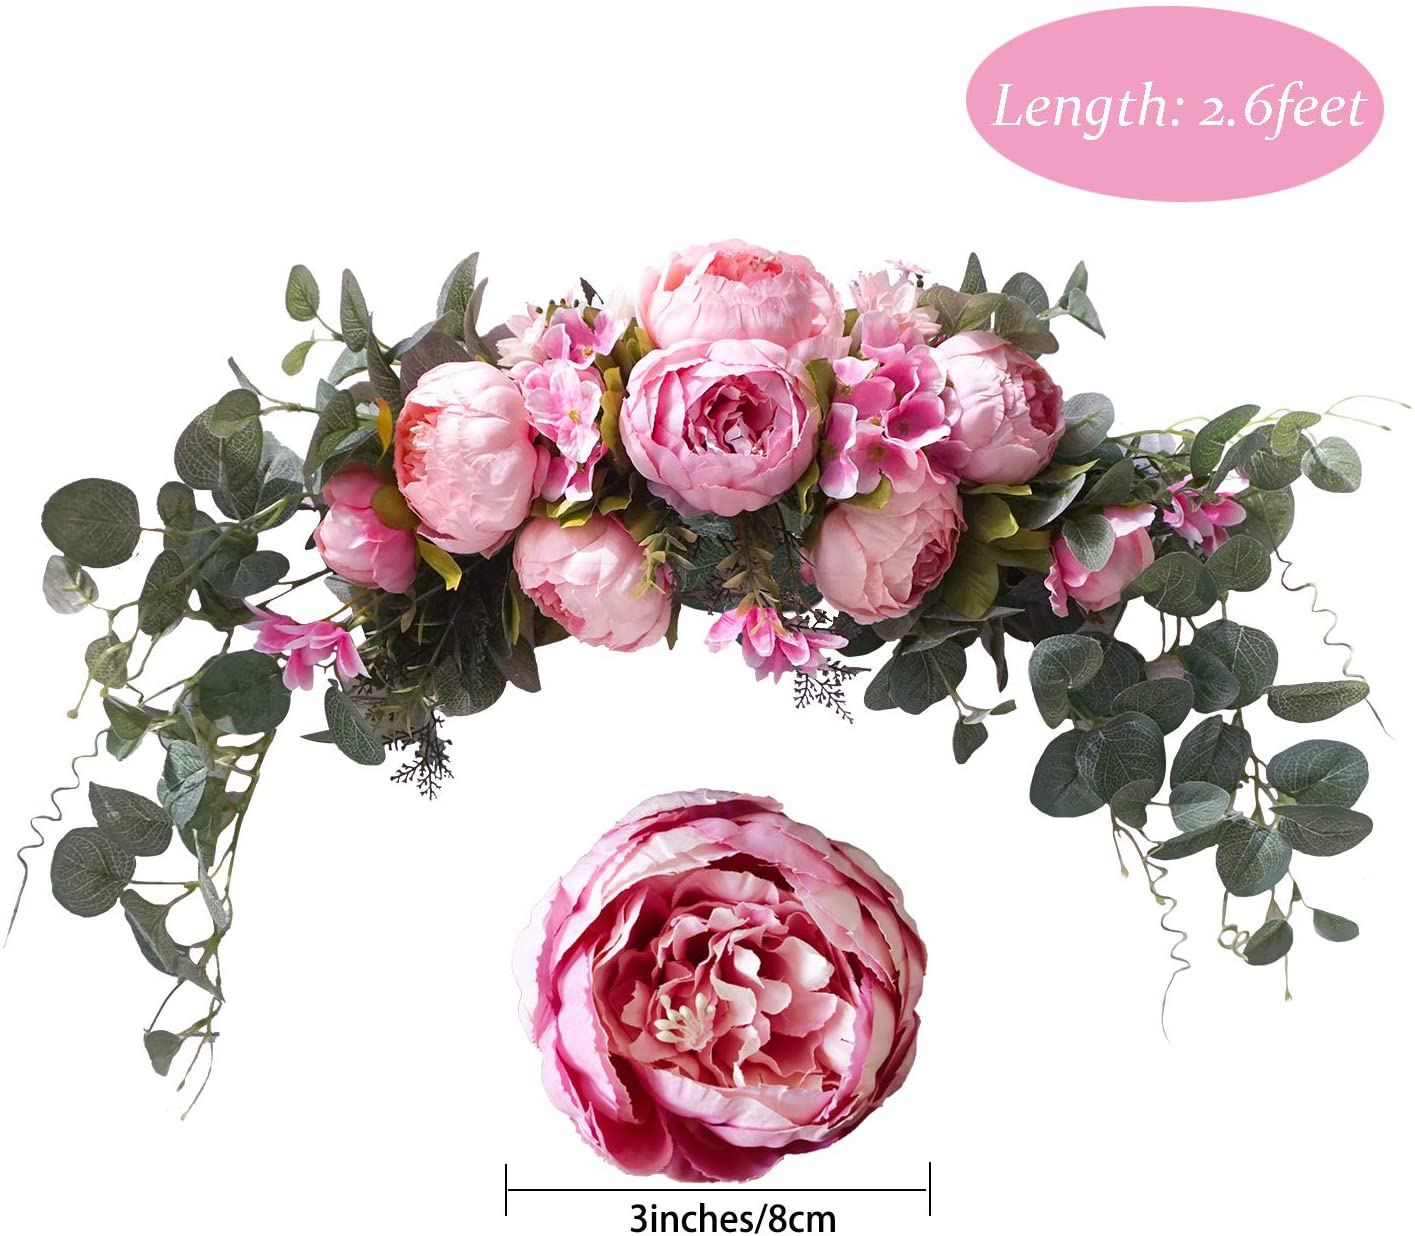 U'Artlines 15'' Artificial Wreath Hanging Rose Garland Swag for Indoor Outdoor Window Wall Wedding Party Decoration (Floral Wreath, 15'' Rose Blue/Cream)